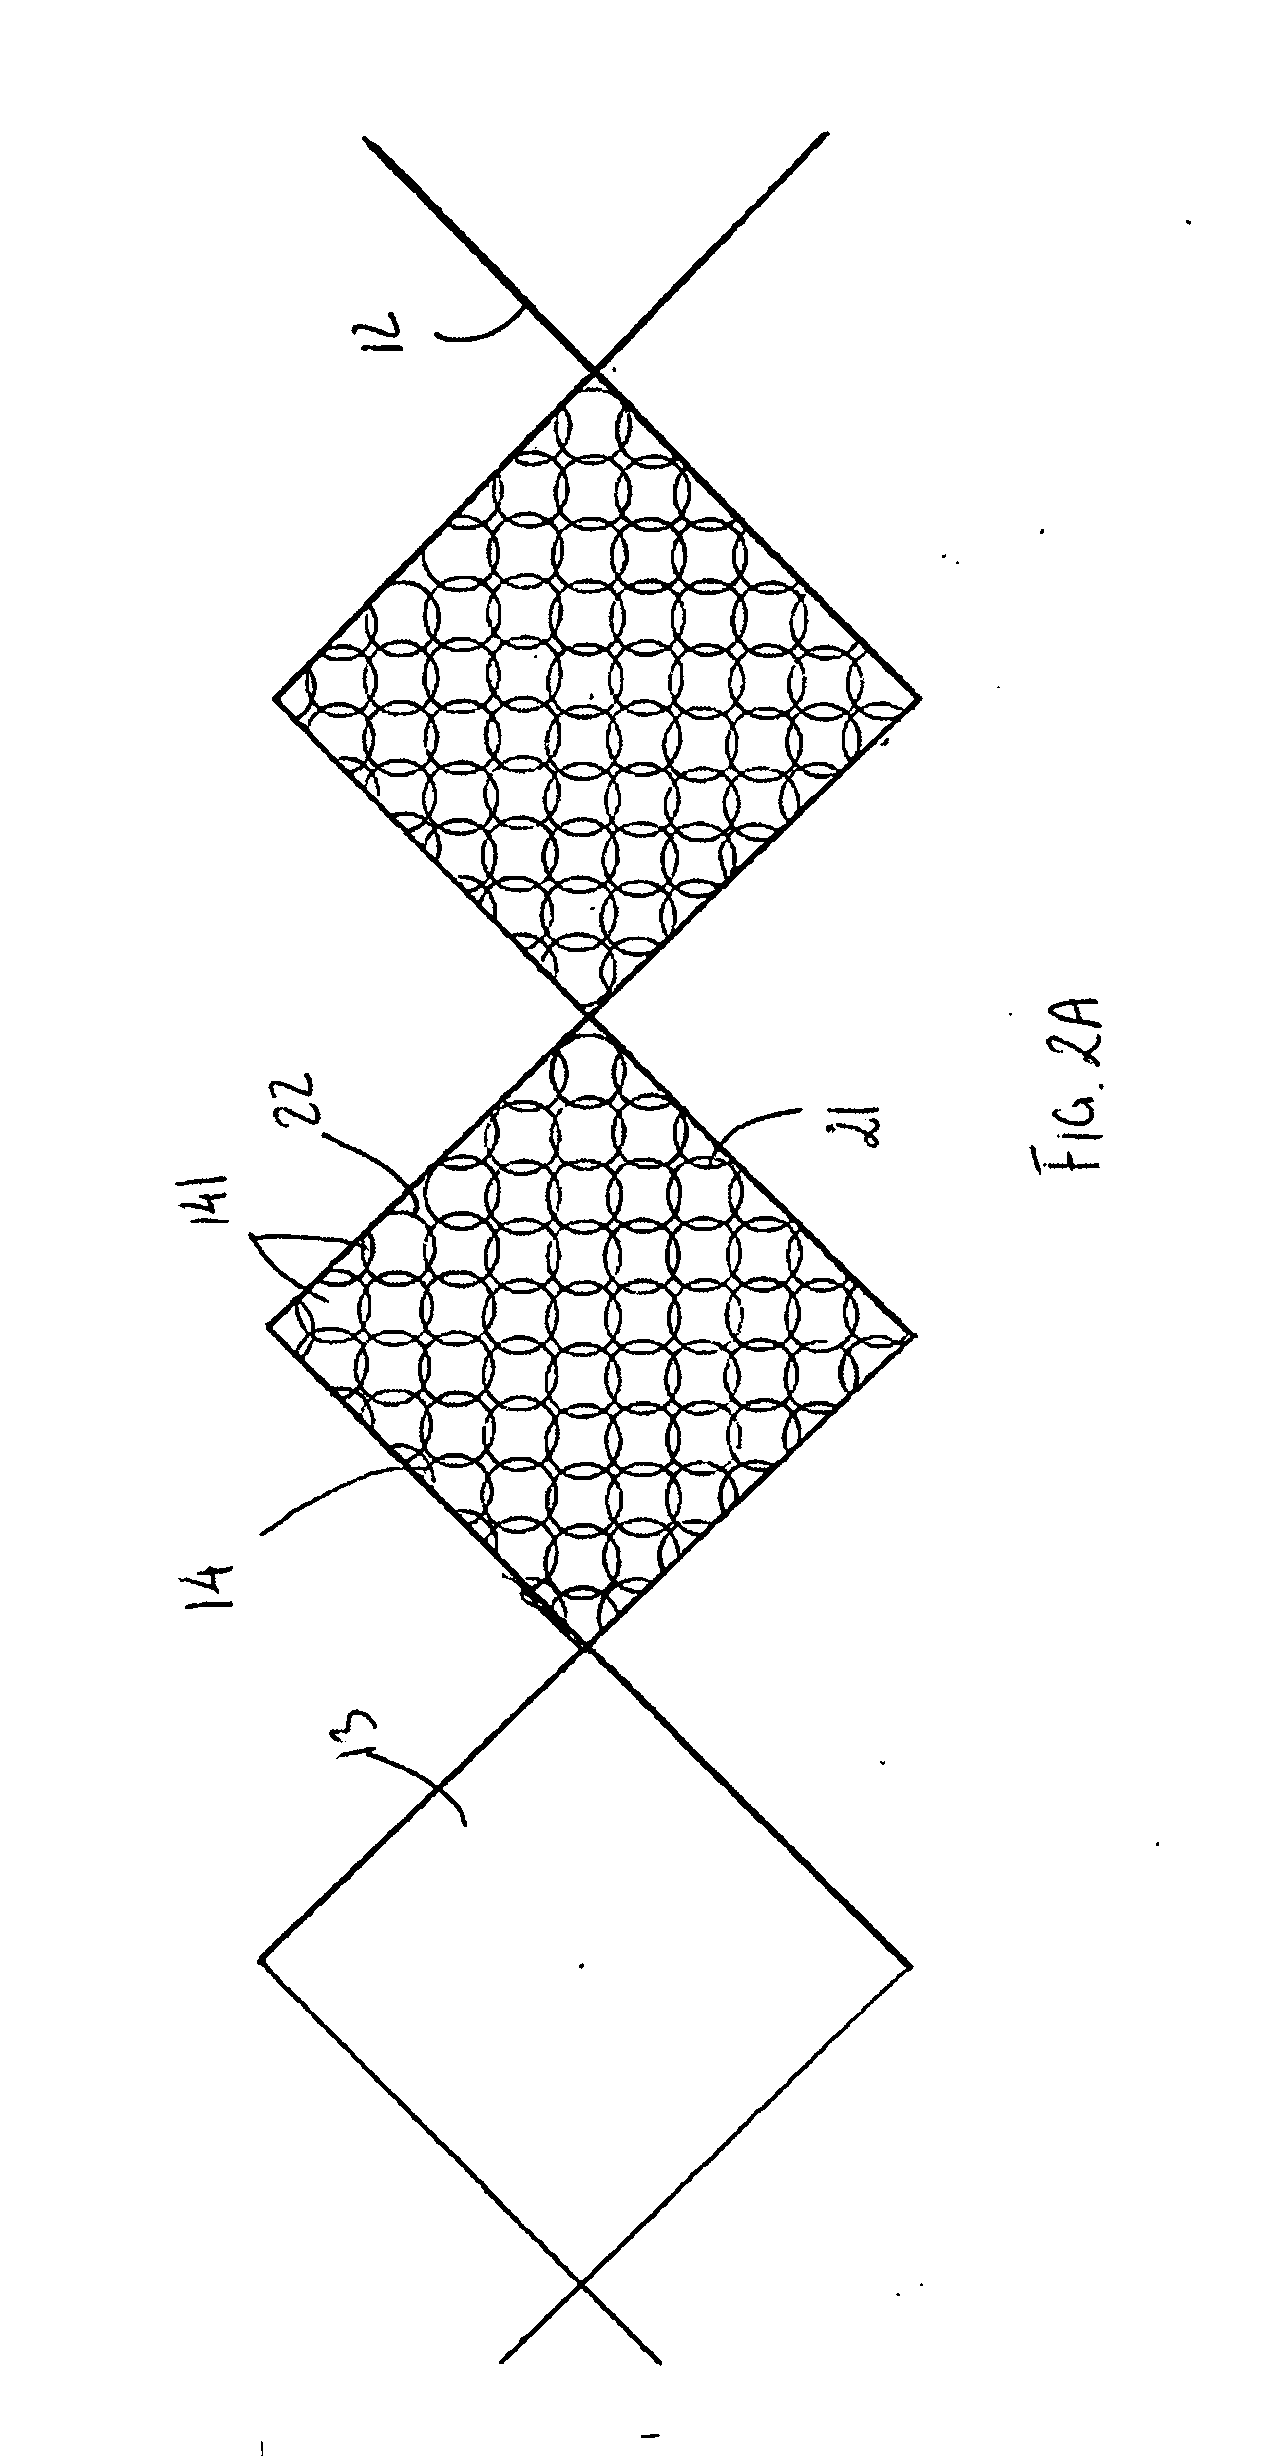 Intravascular device with netting system